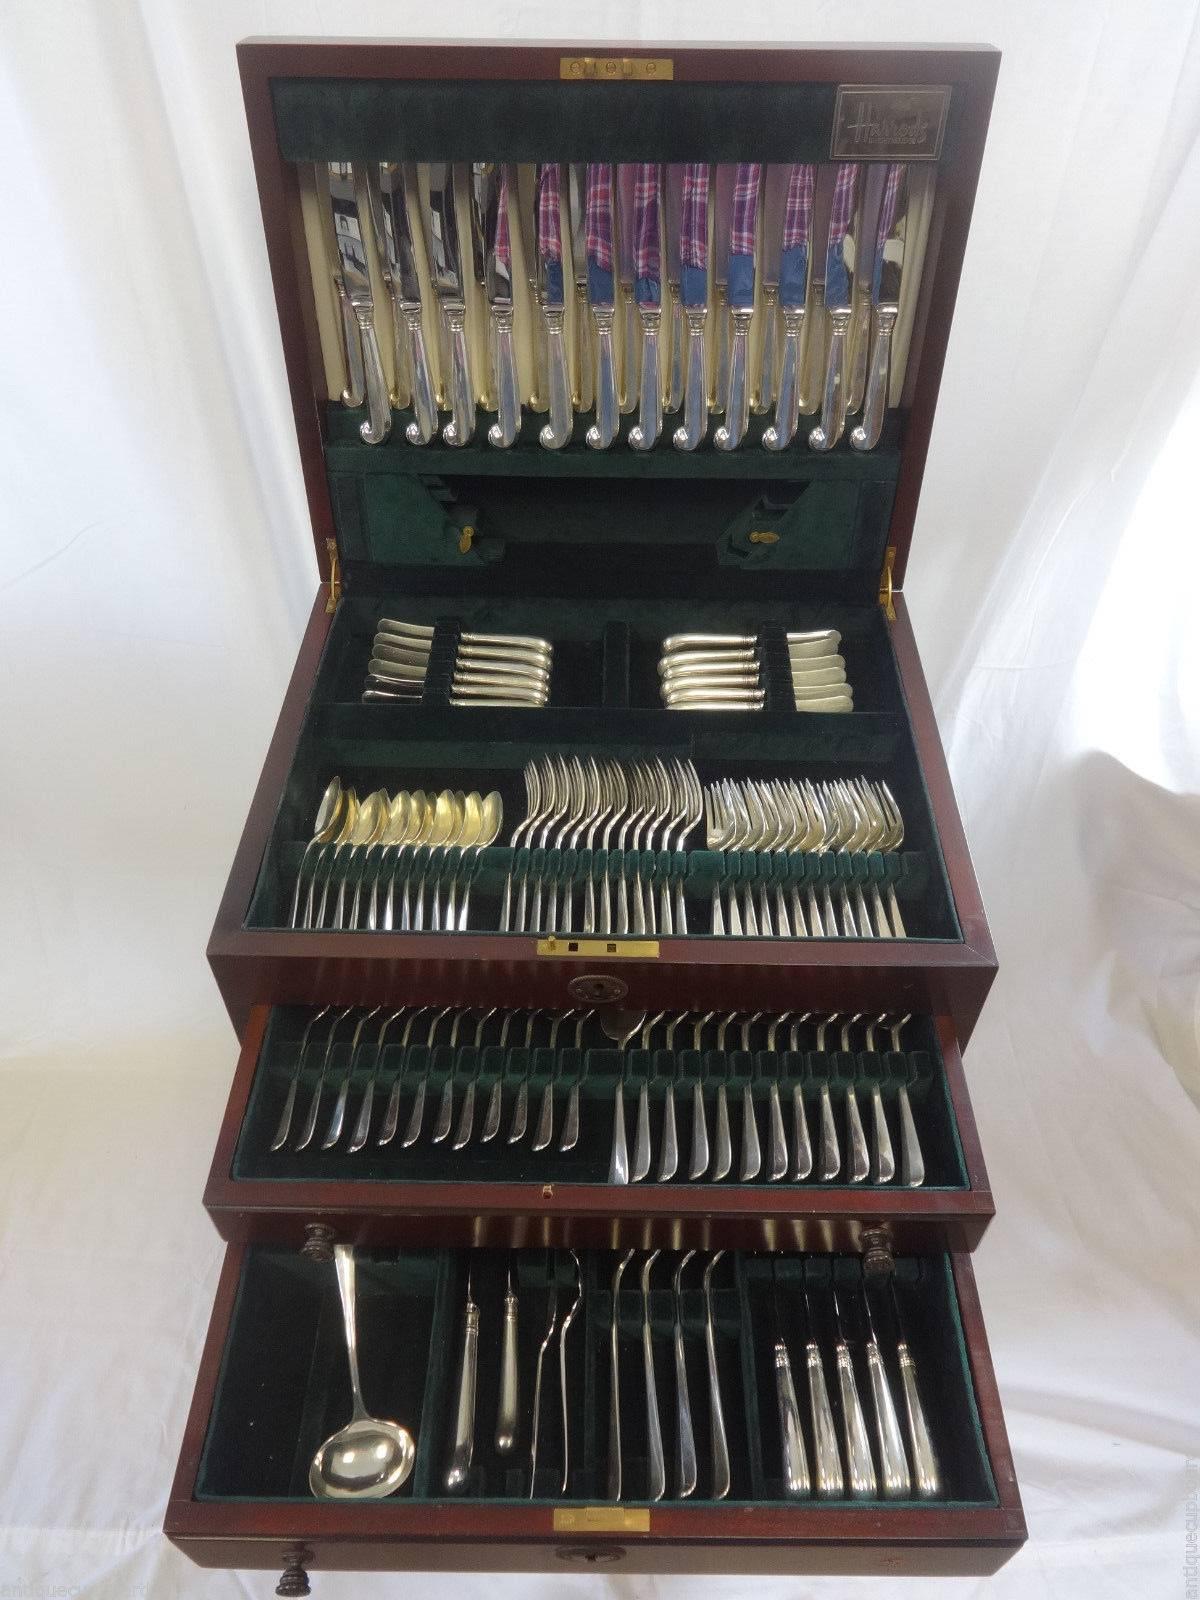 Massive exceptional RAT TAIL RATTAIL by TIFFANY & CO. (MADE IN ENGLAND) sterling silver Flatware set - 157 pieces in LARGE fitted chest by Harrods of Knights Bridge with stand. This set includes:

12 DINNER SIZE KNIVES, 9 3/4